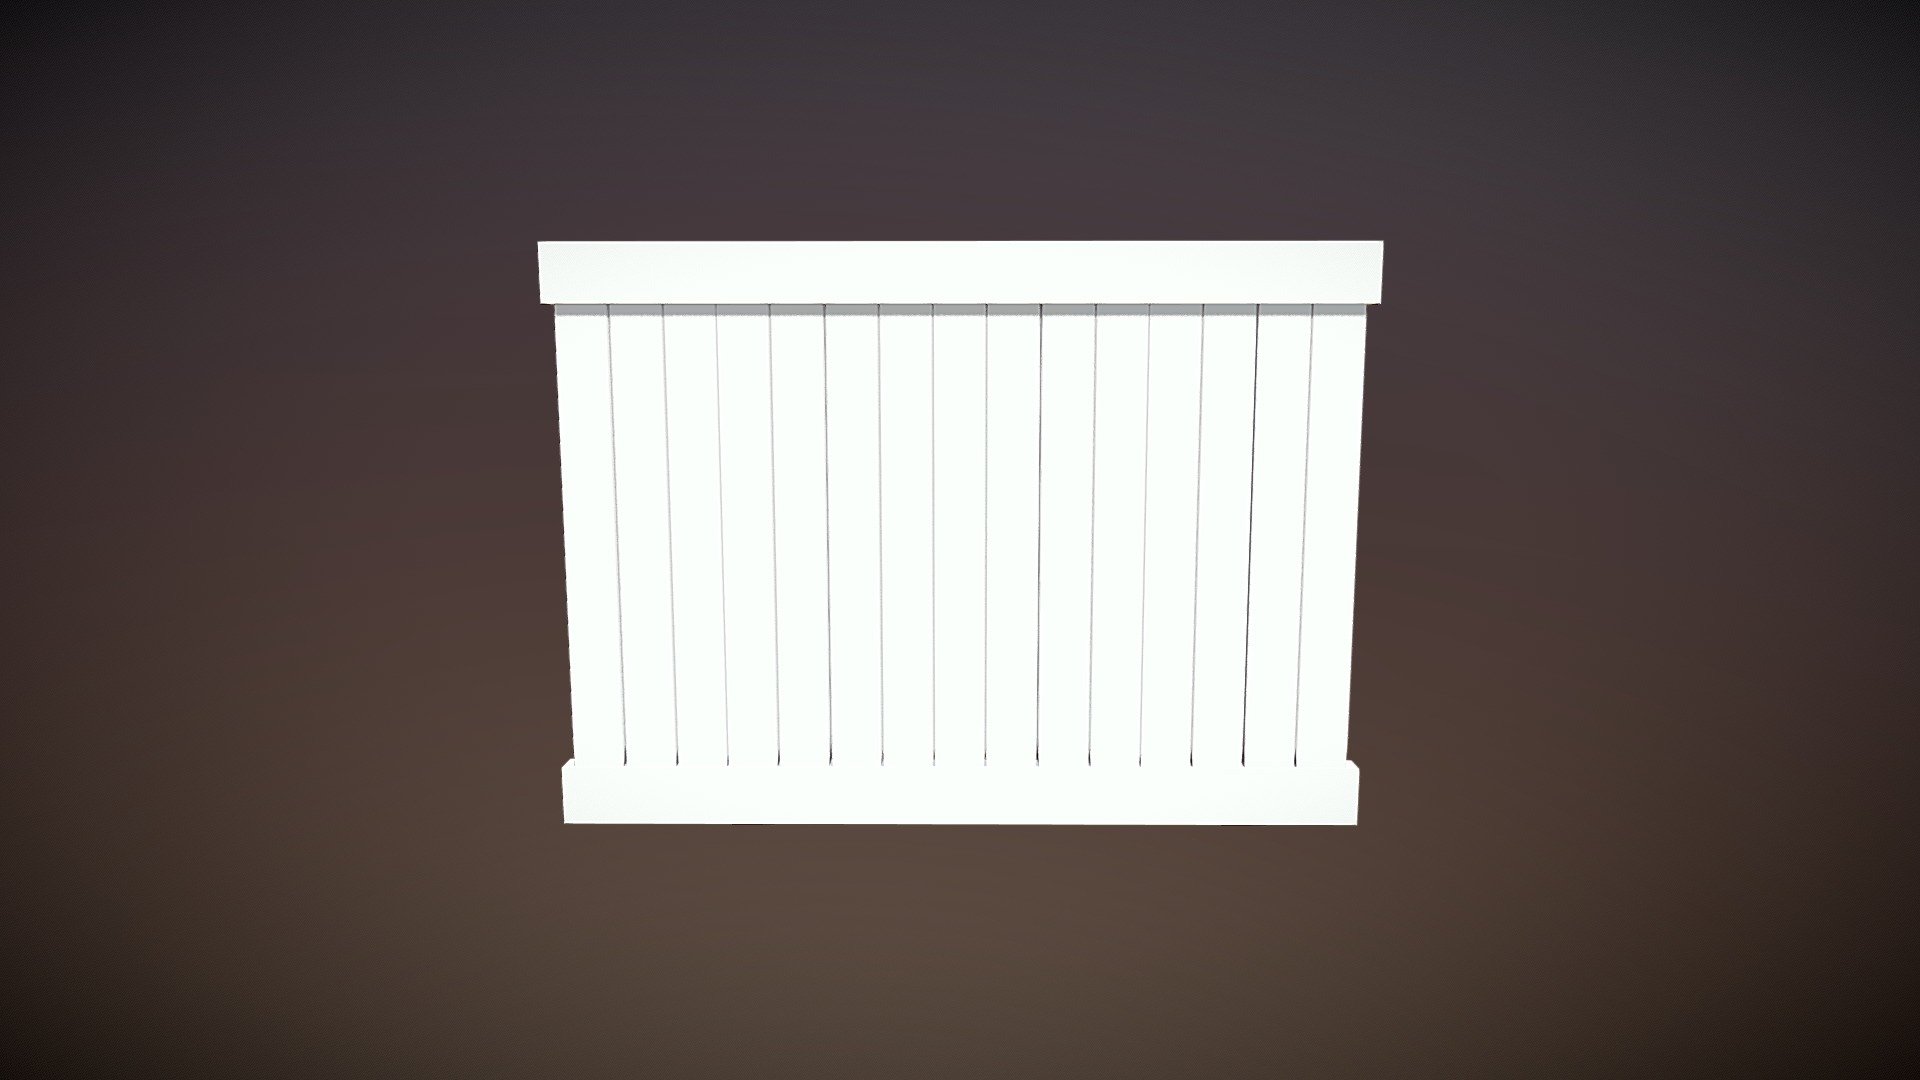 Fence - Vinyl fence with no posts - low poly